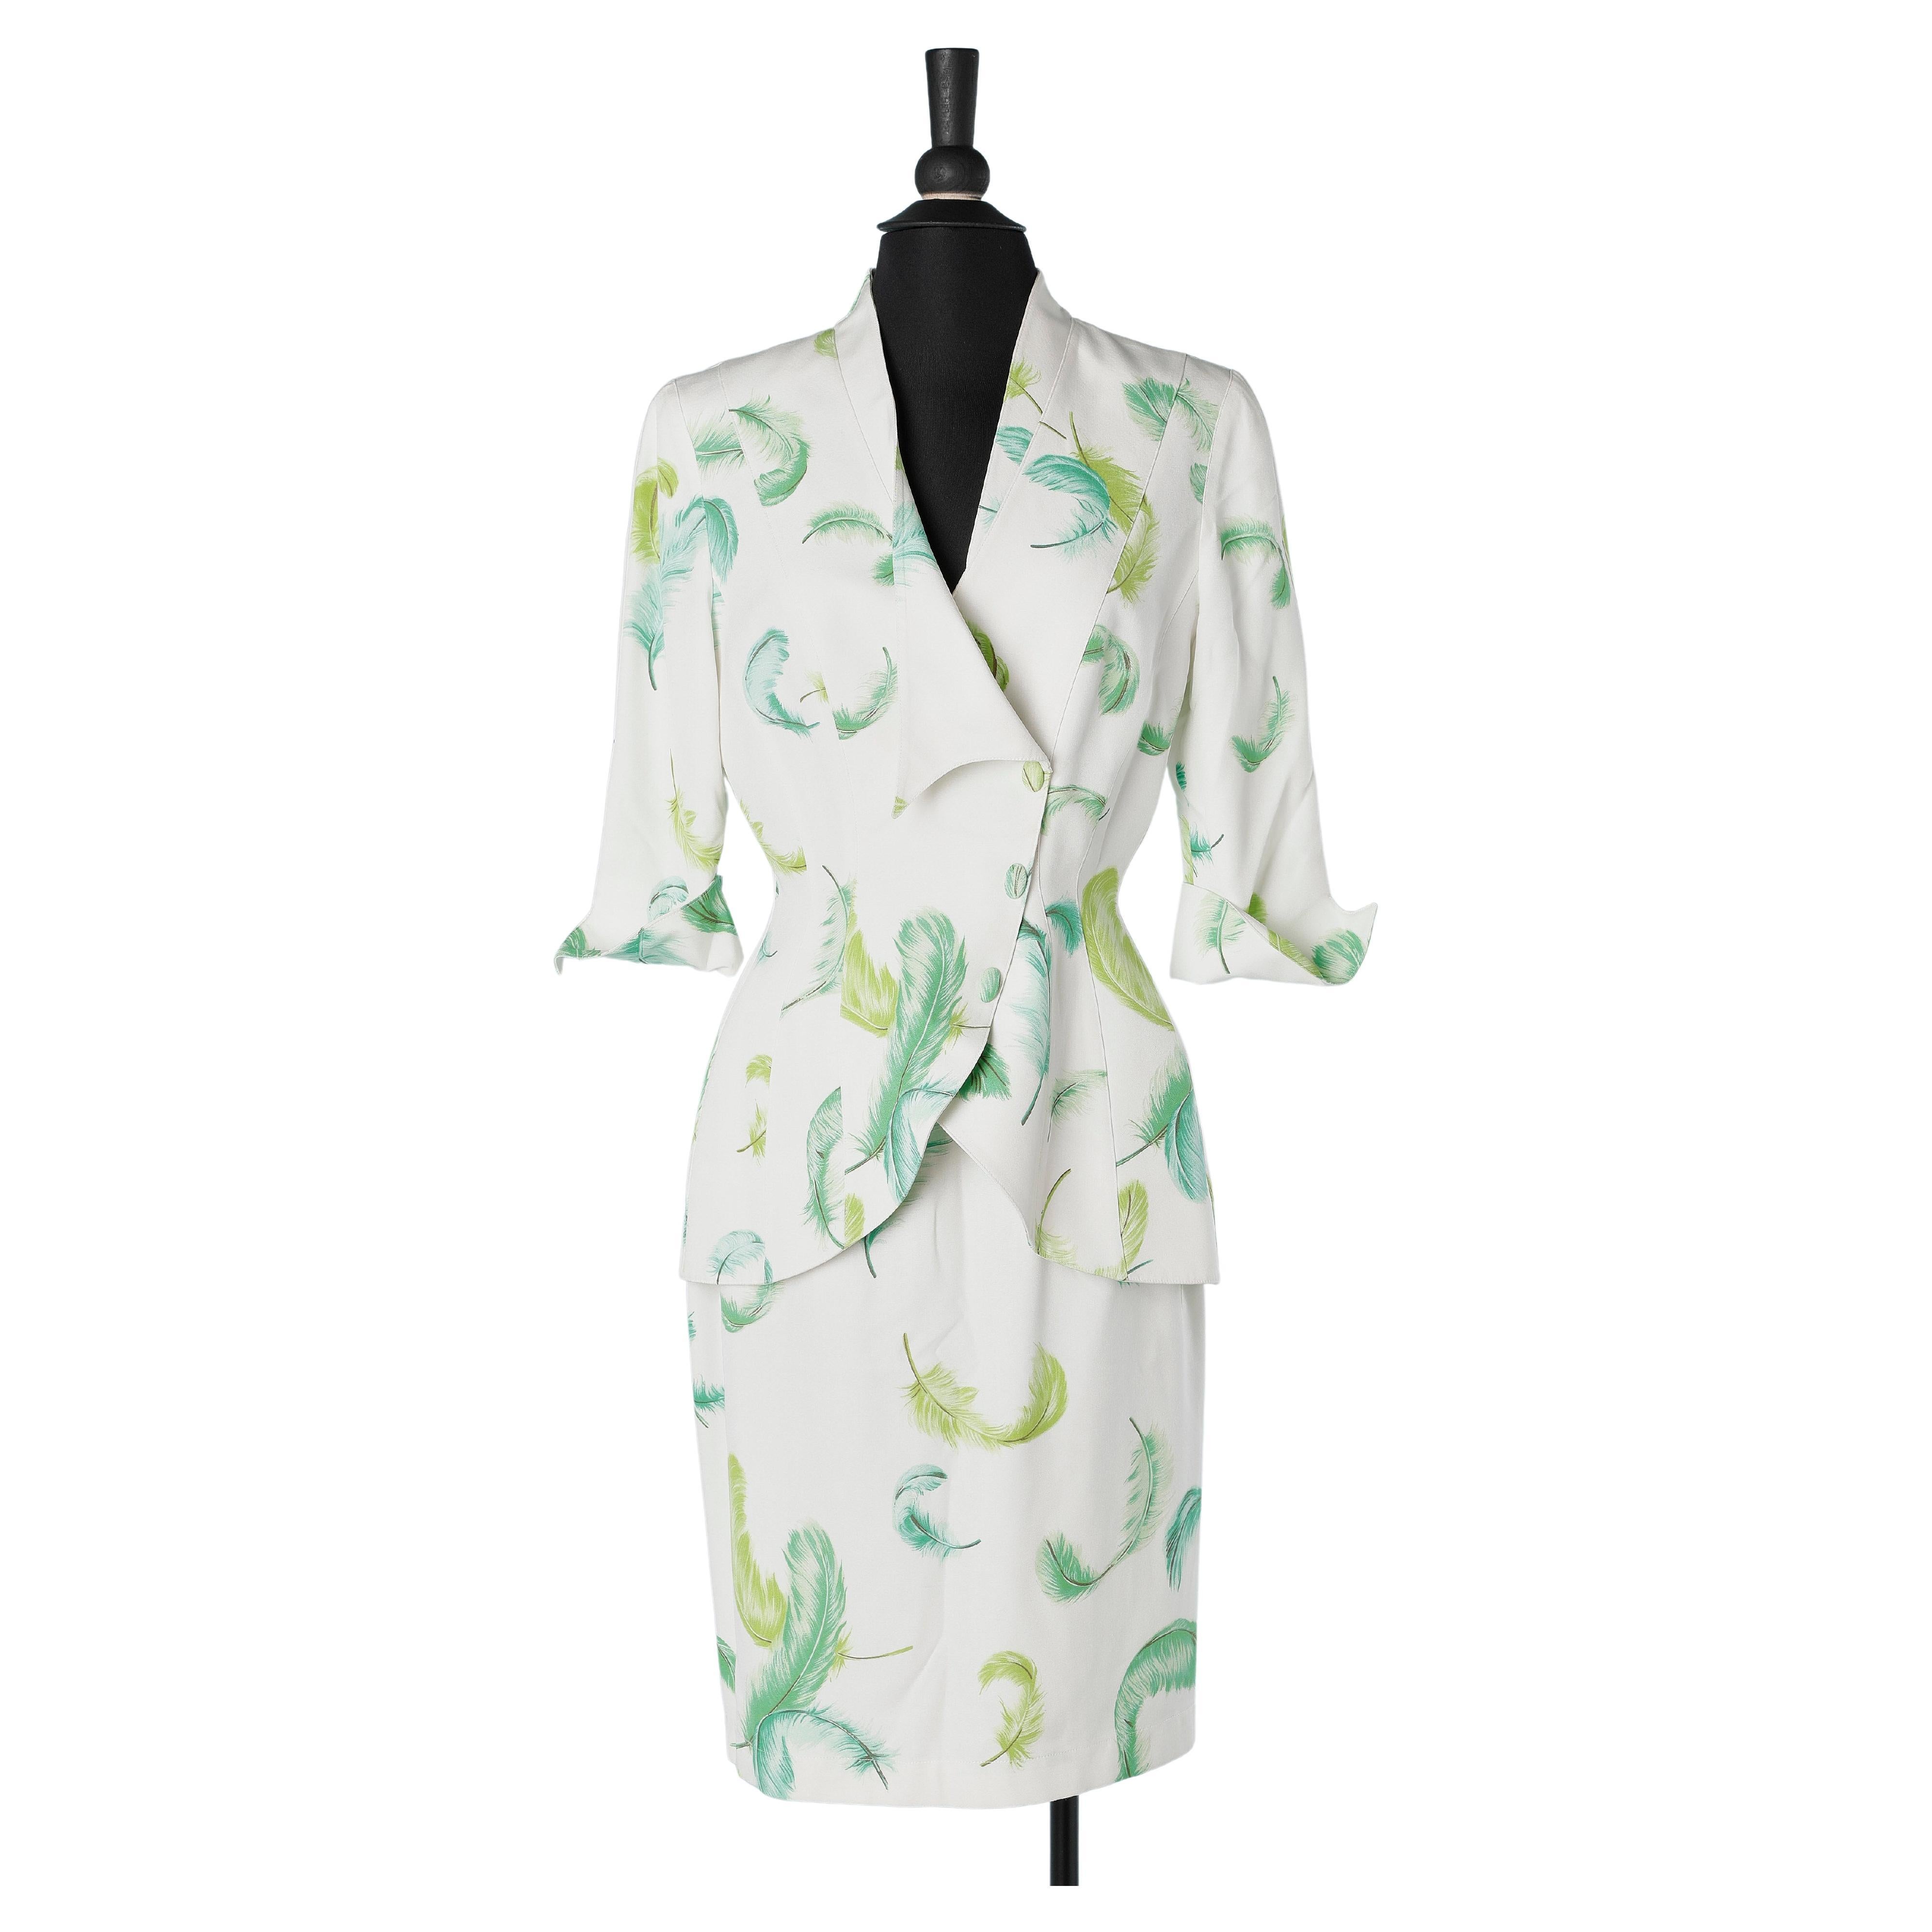 White skirt-suit with green feathers print Thierry Mugler 